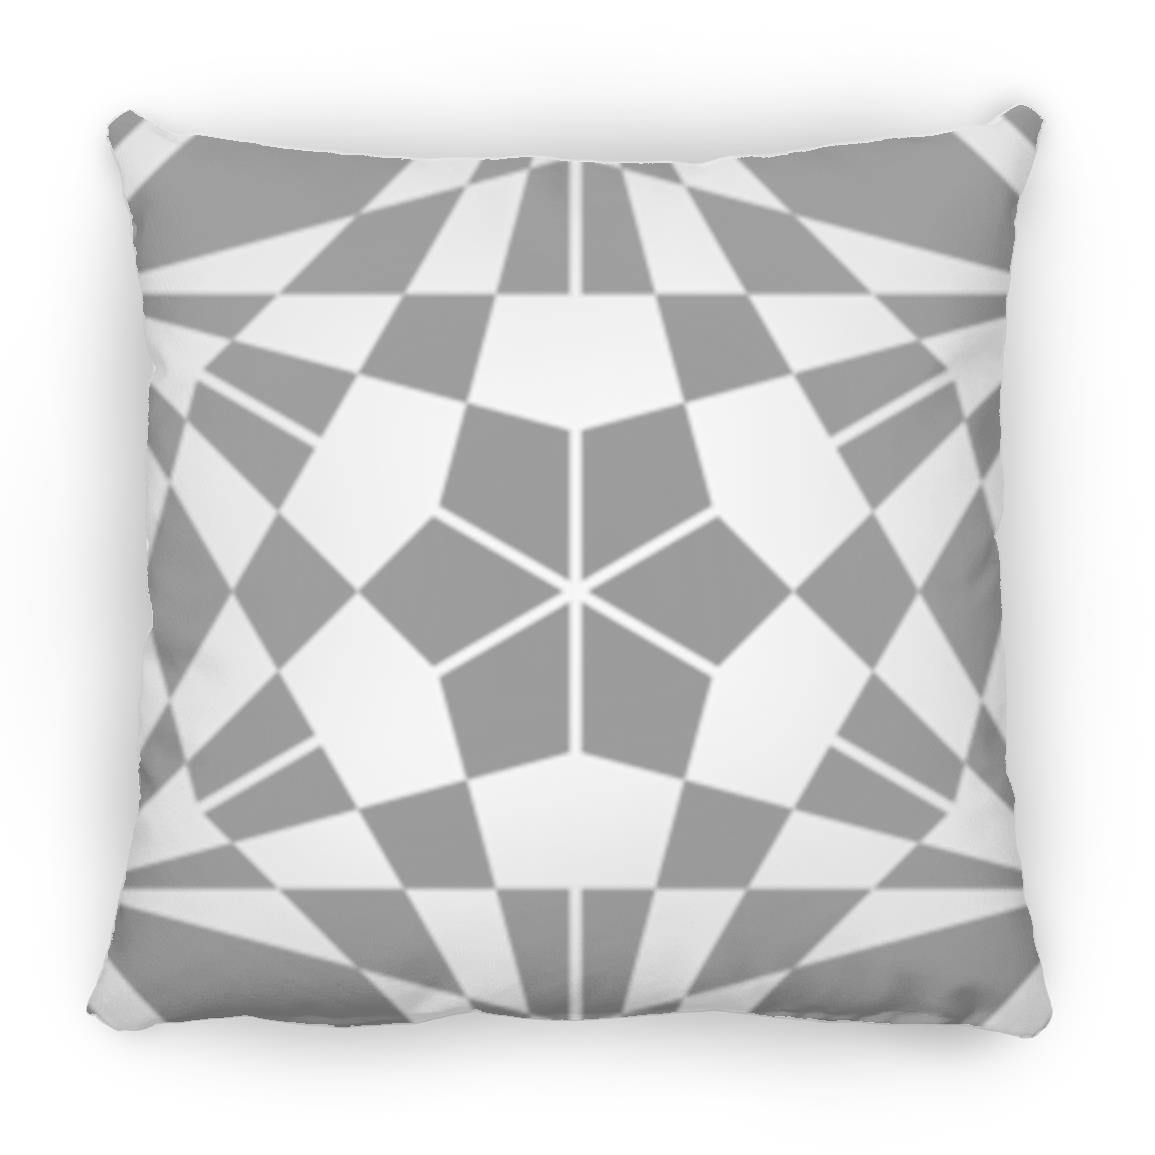 Crop Circle Pillow - Dodworth - Shapes of Wisdom